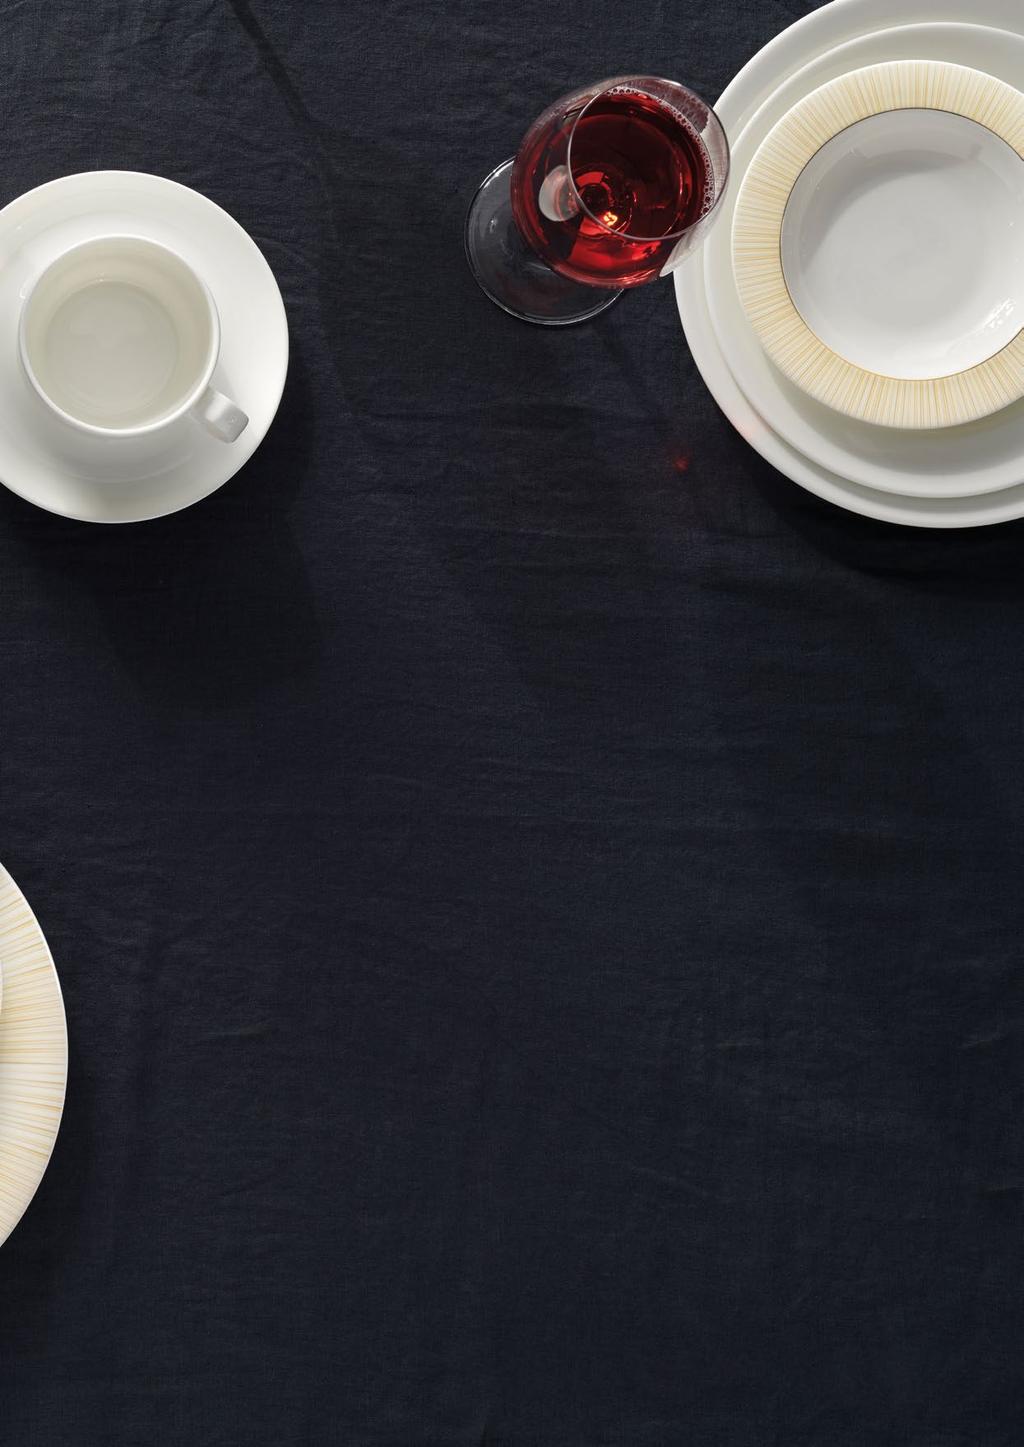 TZELAN by ROYAL PORCELAIN Banquet Assortment A durable bone china body with a reinforced edge becomes an elegant option designed to withstand the